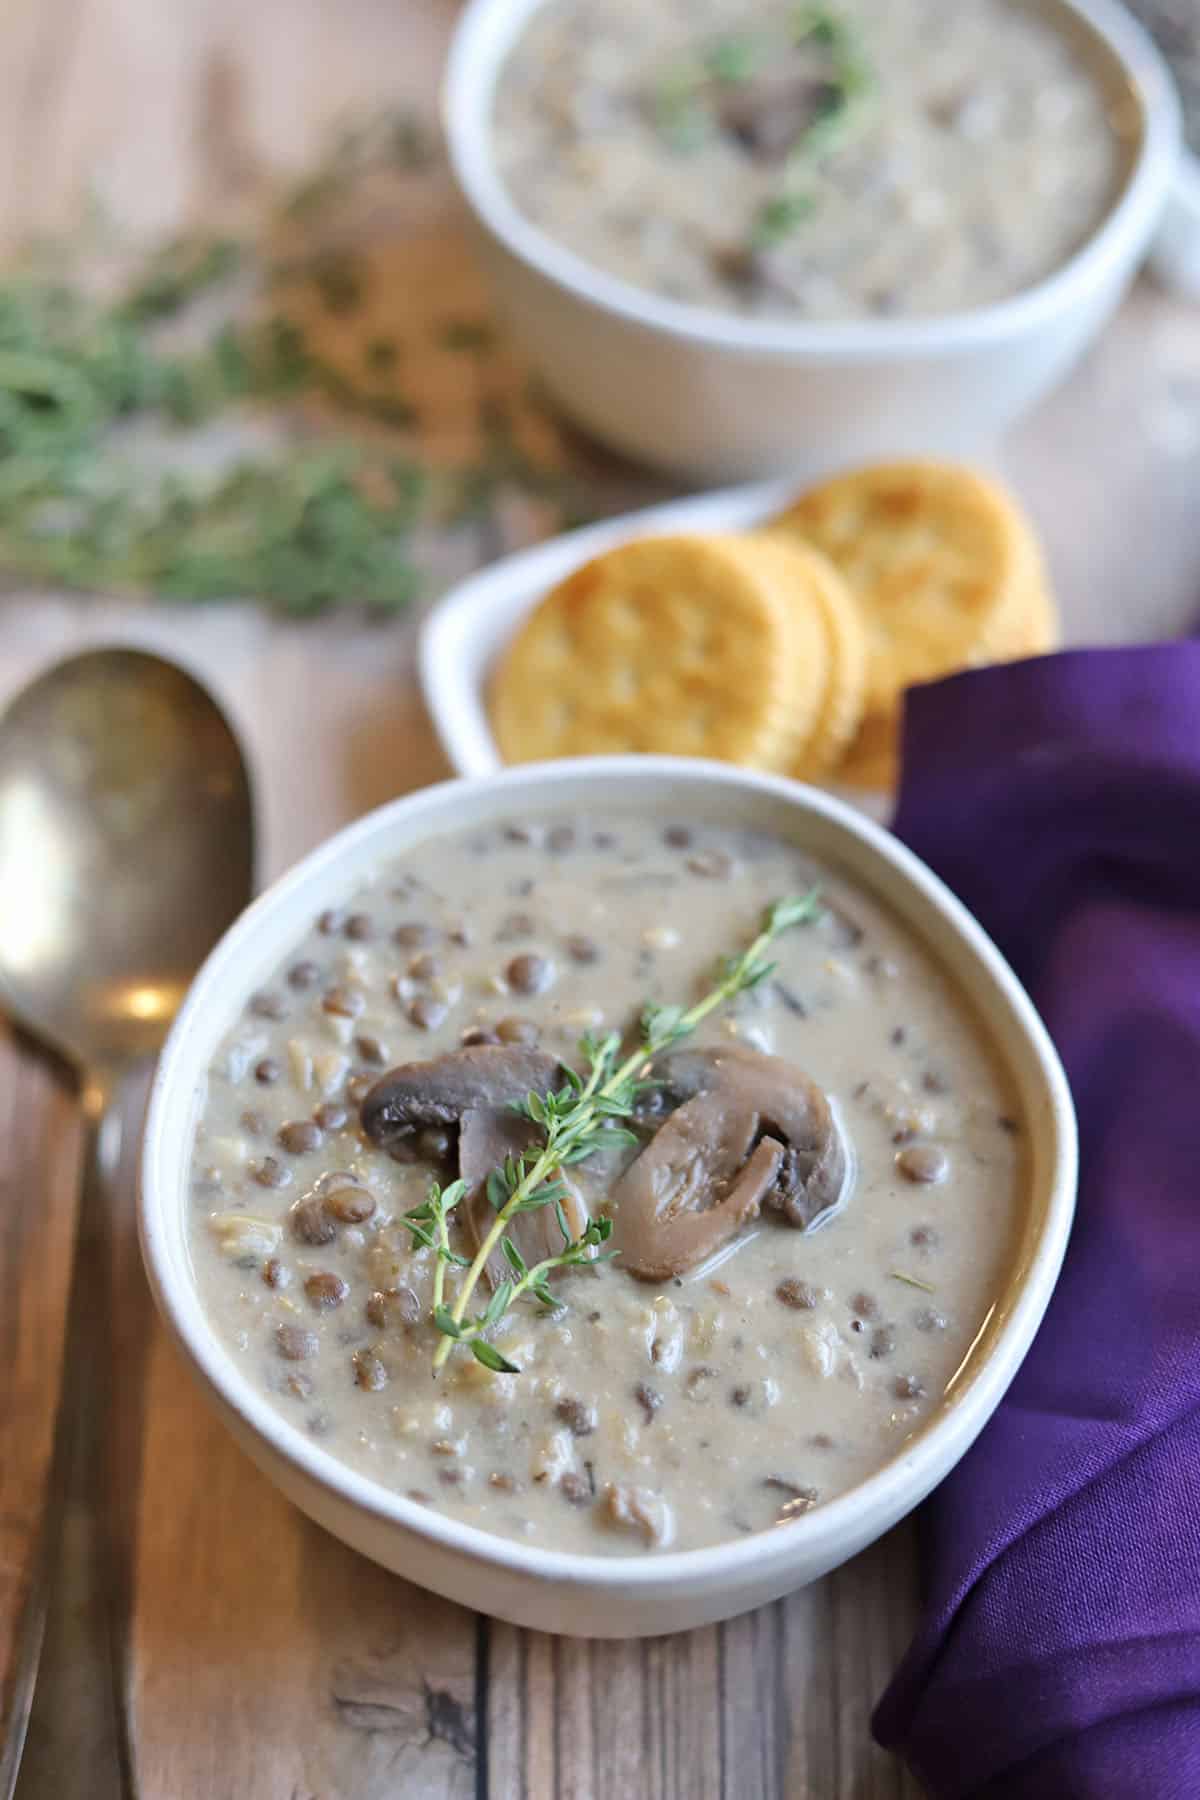 Creamy mushroom lentil soup in bowl by crackers and spoon.